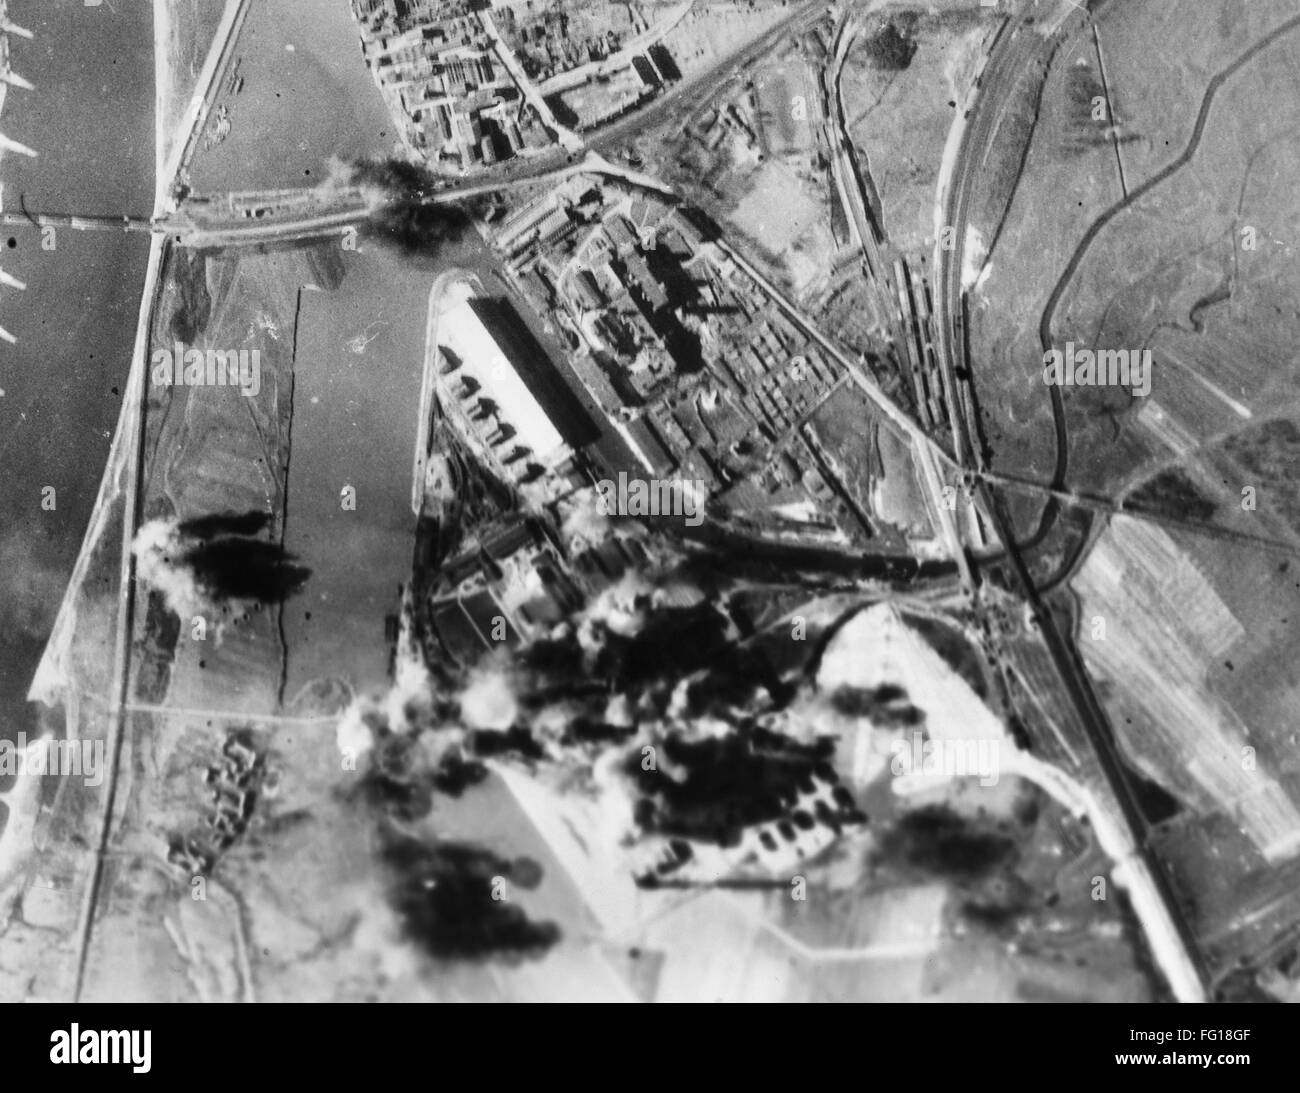 BERLIN: BOMBING, 1944. /nU.S. Army 8th Air Force drop bombs on an industrial area of Greater Berlin, 6 March 1944. Stock Photo